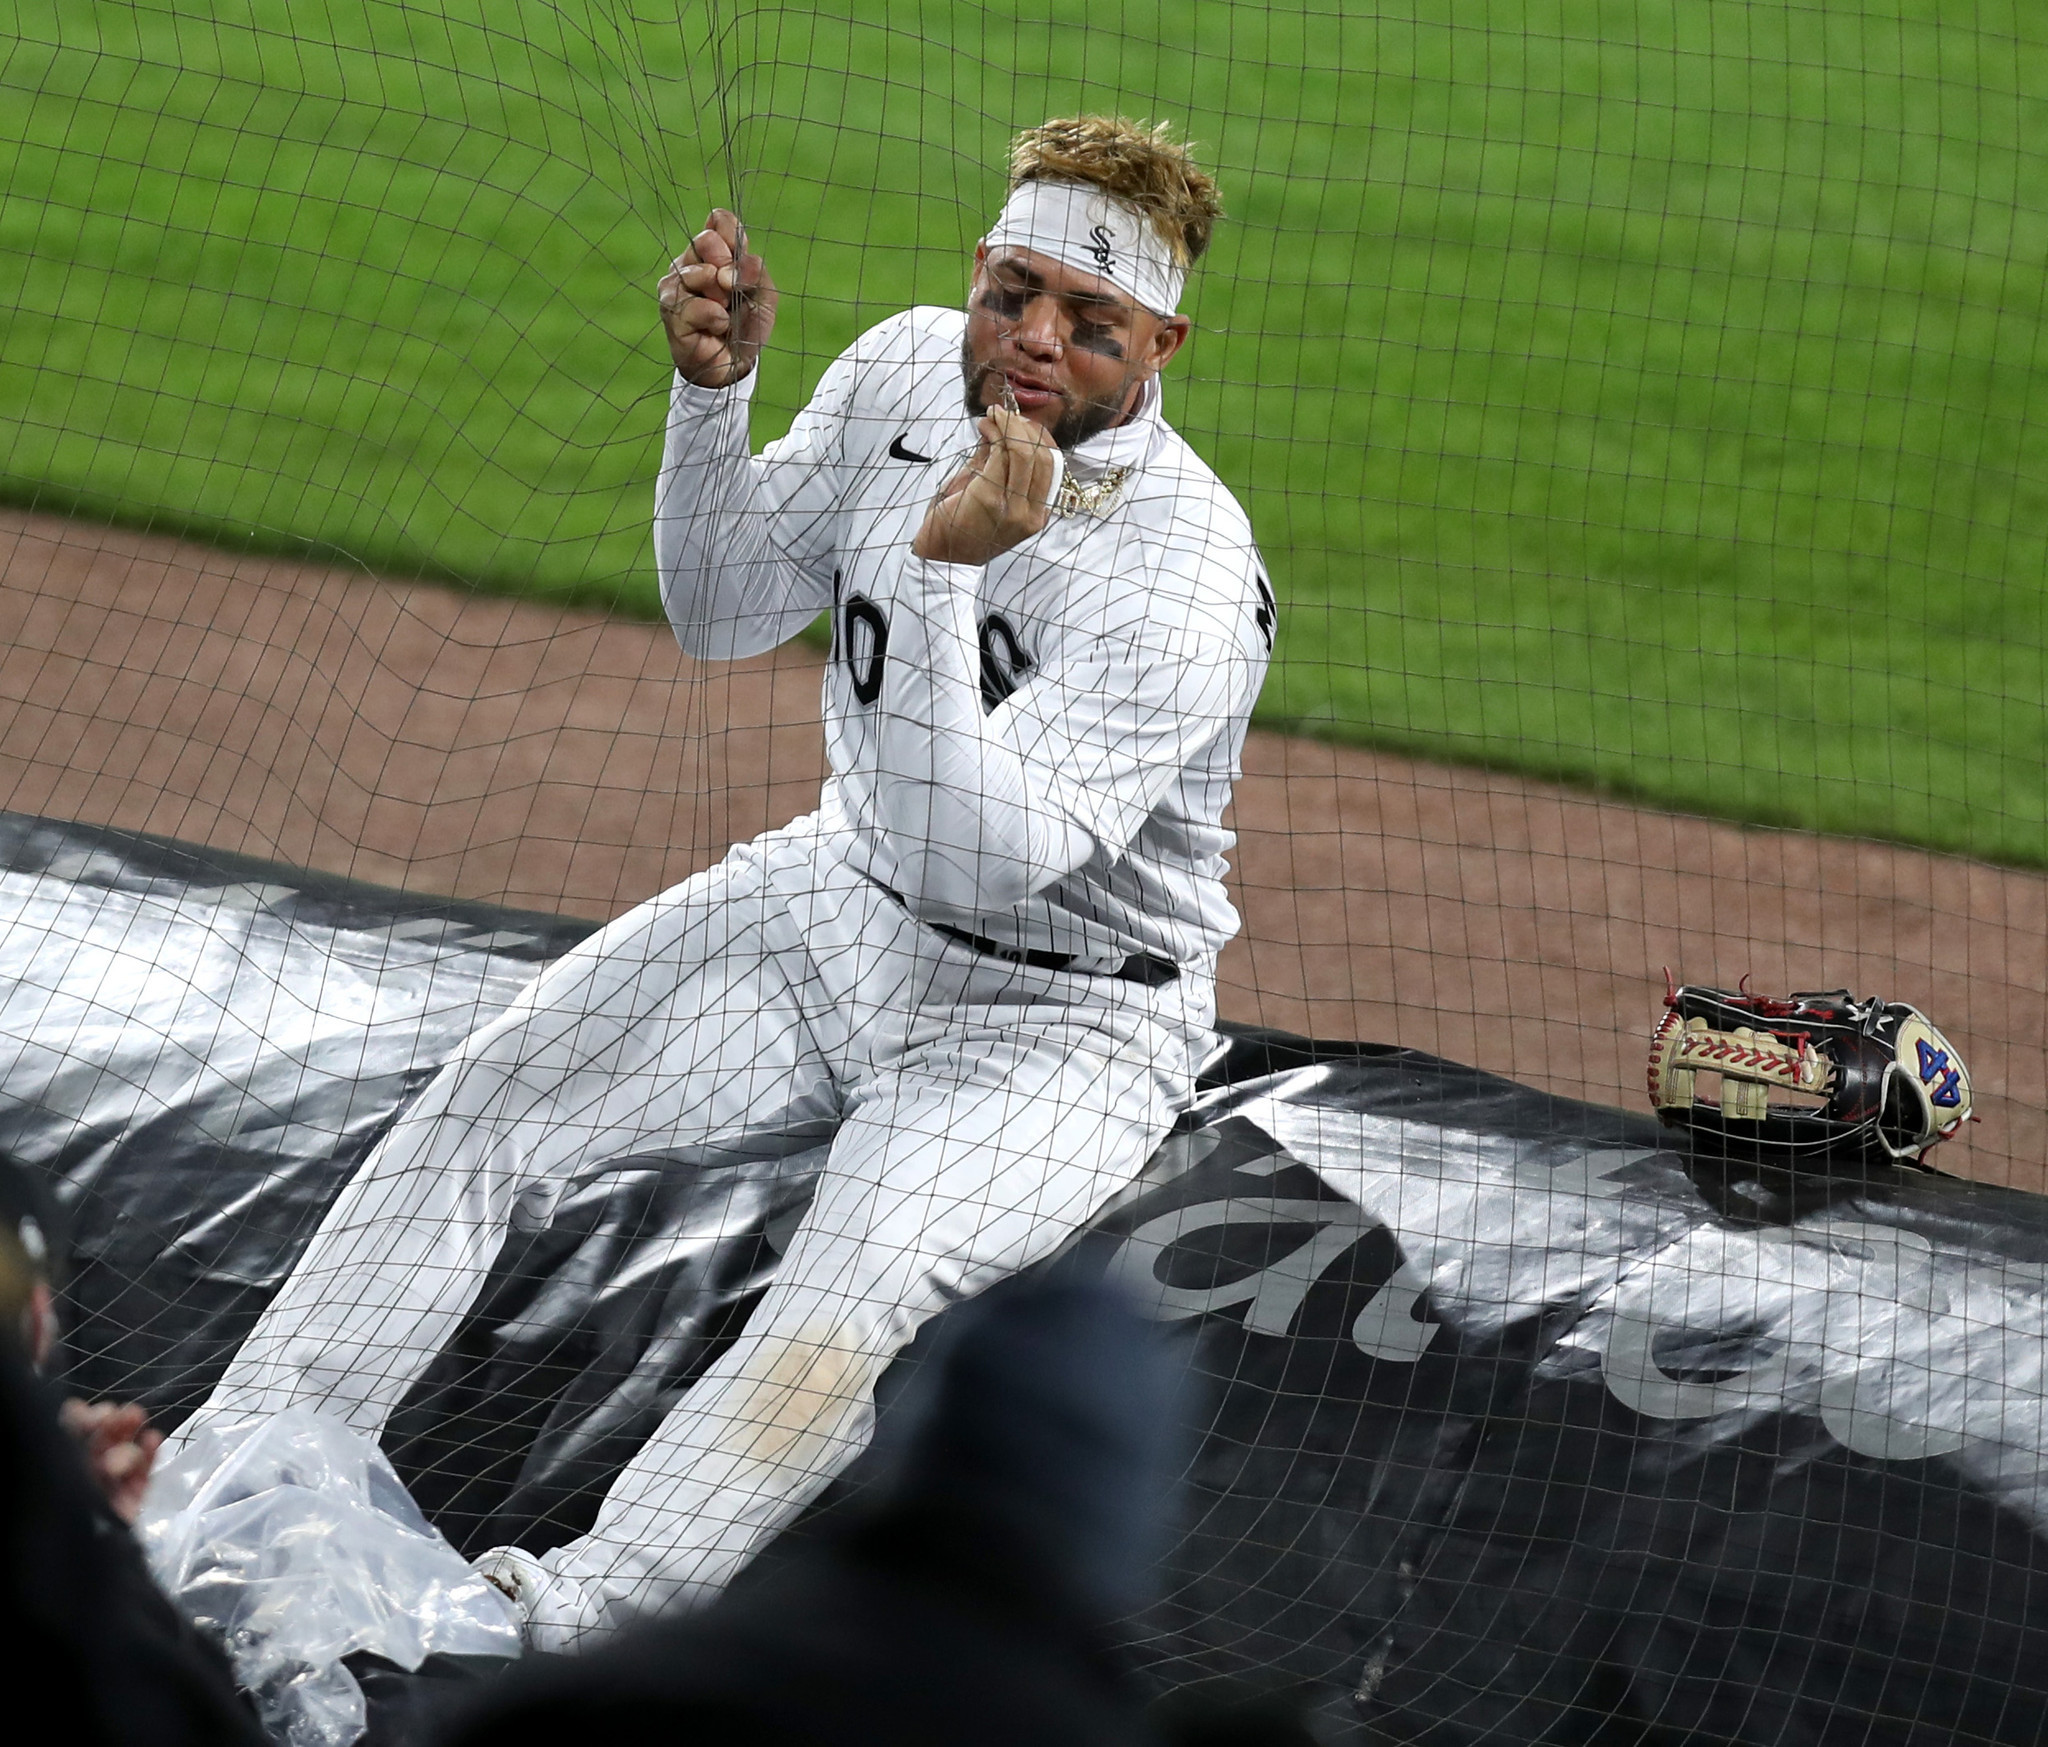 Yoan Moncada, other young White Sox take positives from Boston despite sweep